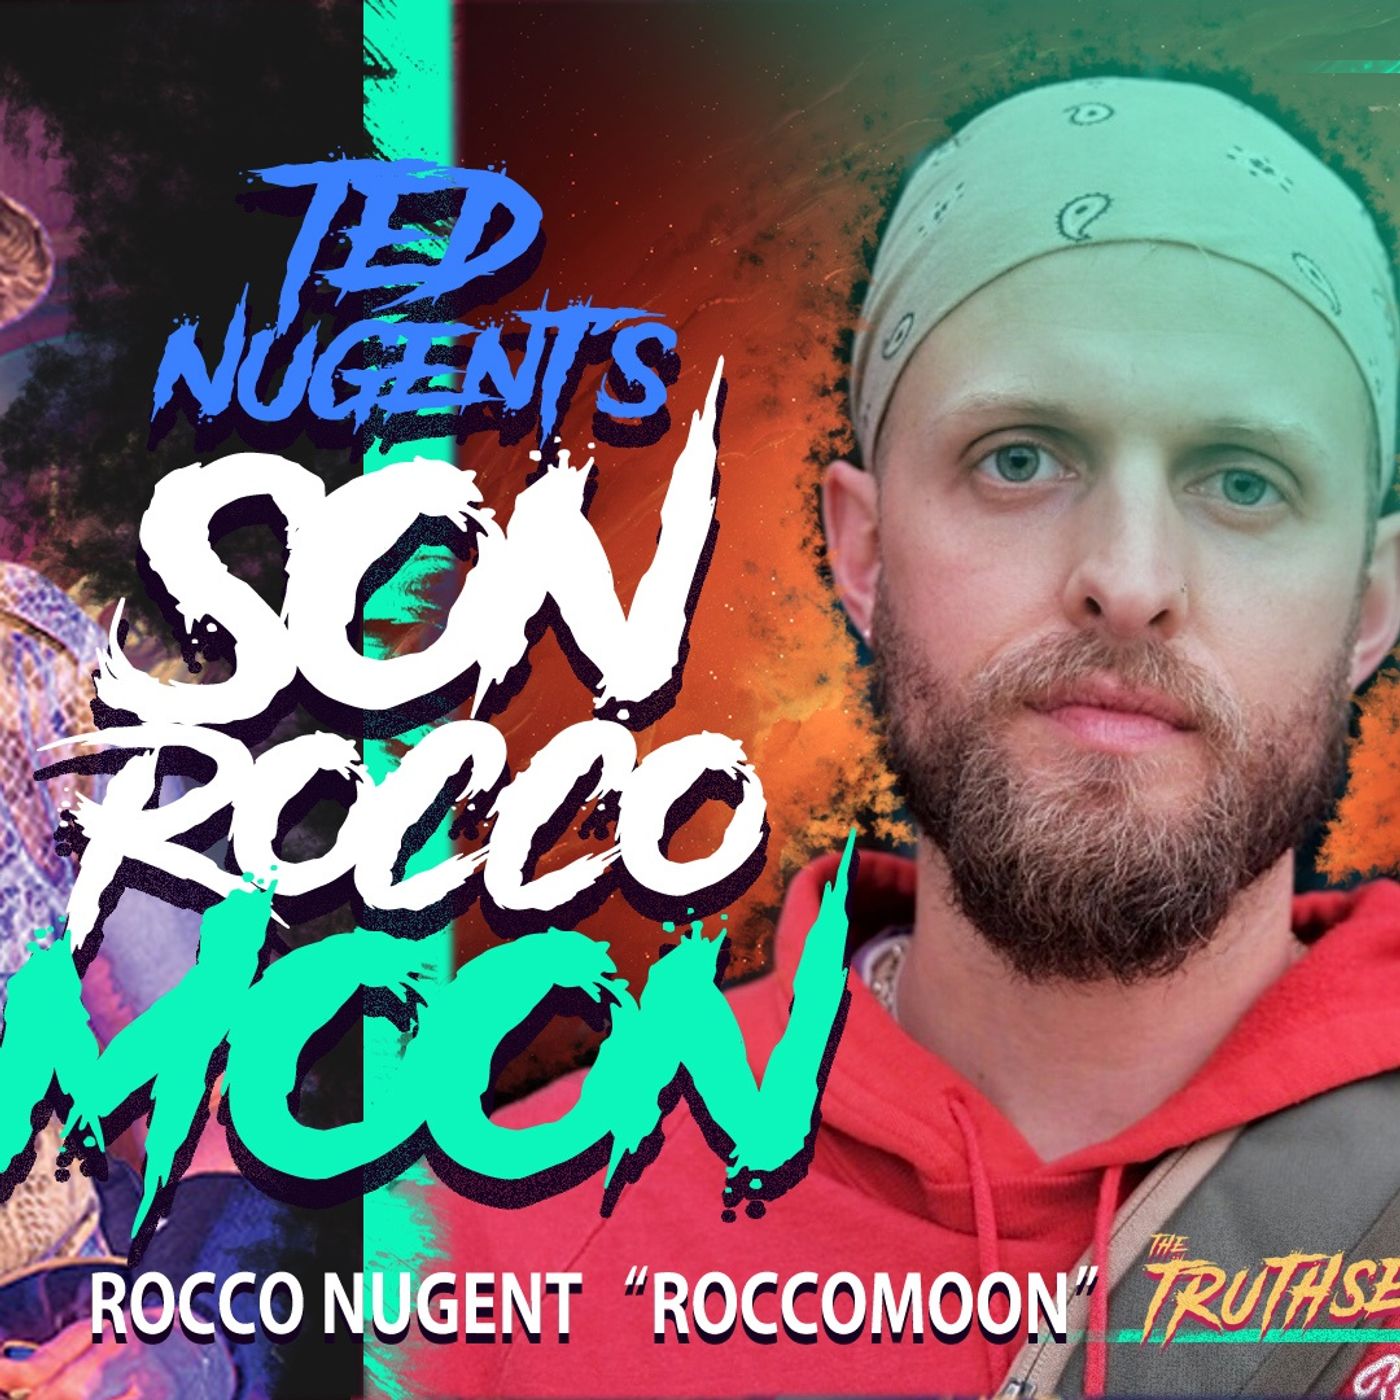 Ted Nugent’s Son Is A Spiritual Power House - Rocco Nugent (Roccomoon)